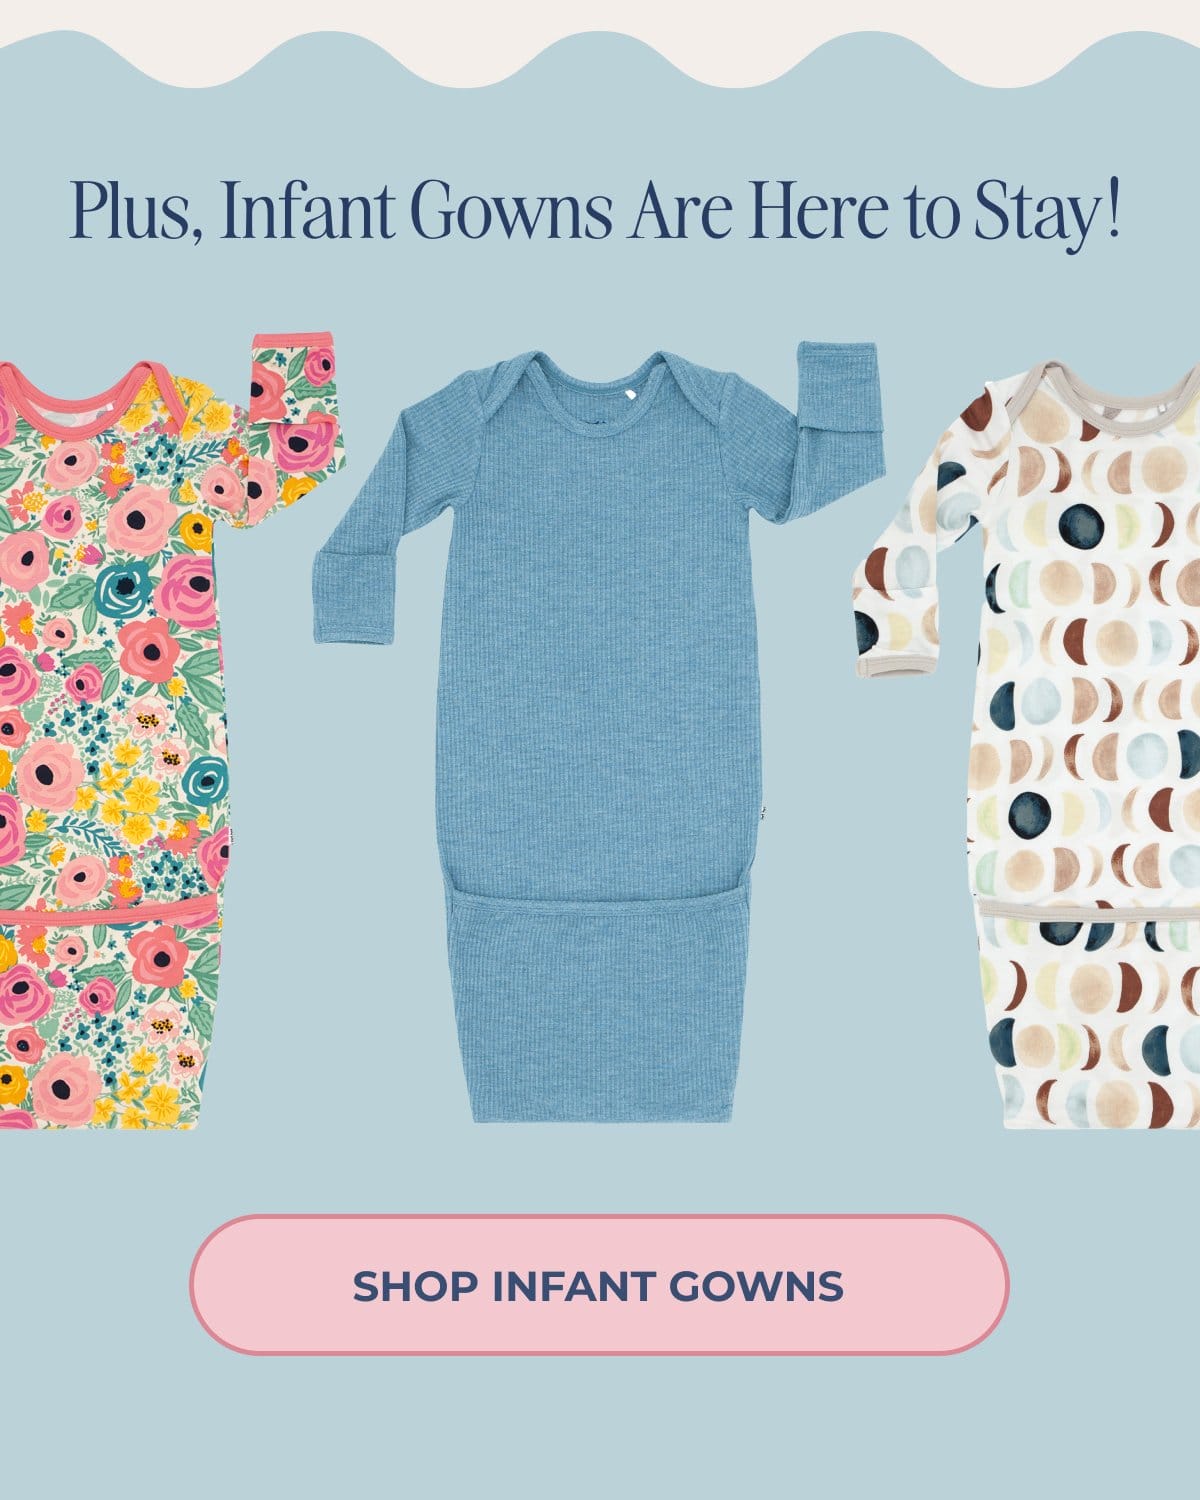 Plus, Infant Gowns Are Here to Stay! | SHOP INFANT GOWNS